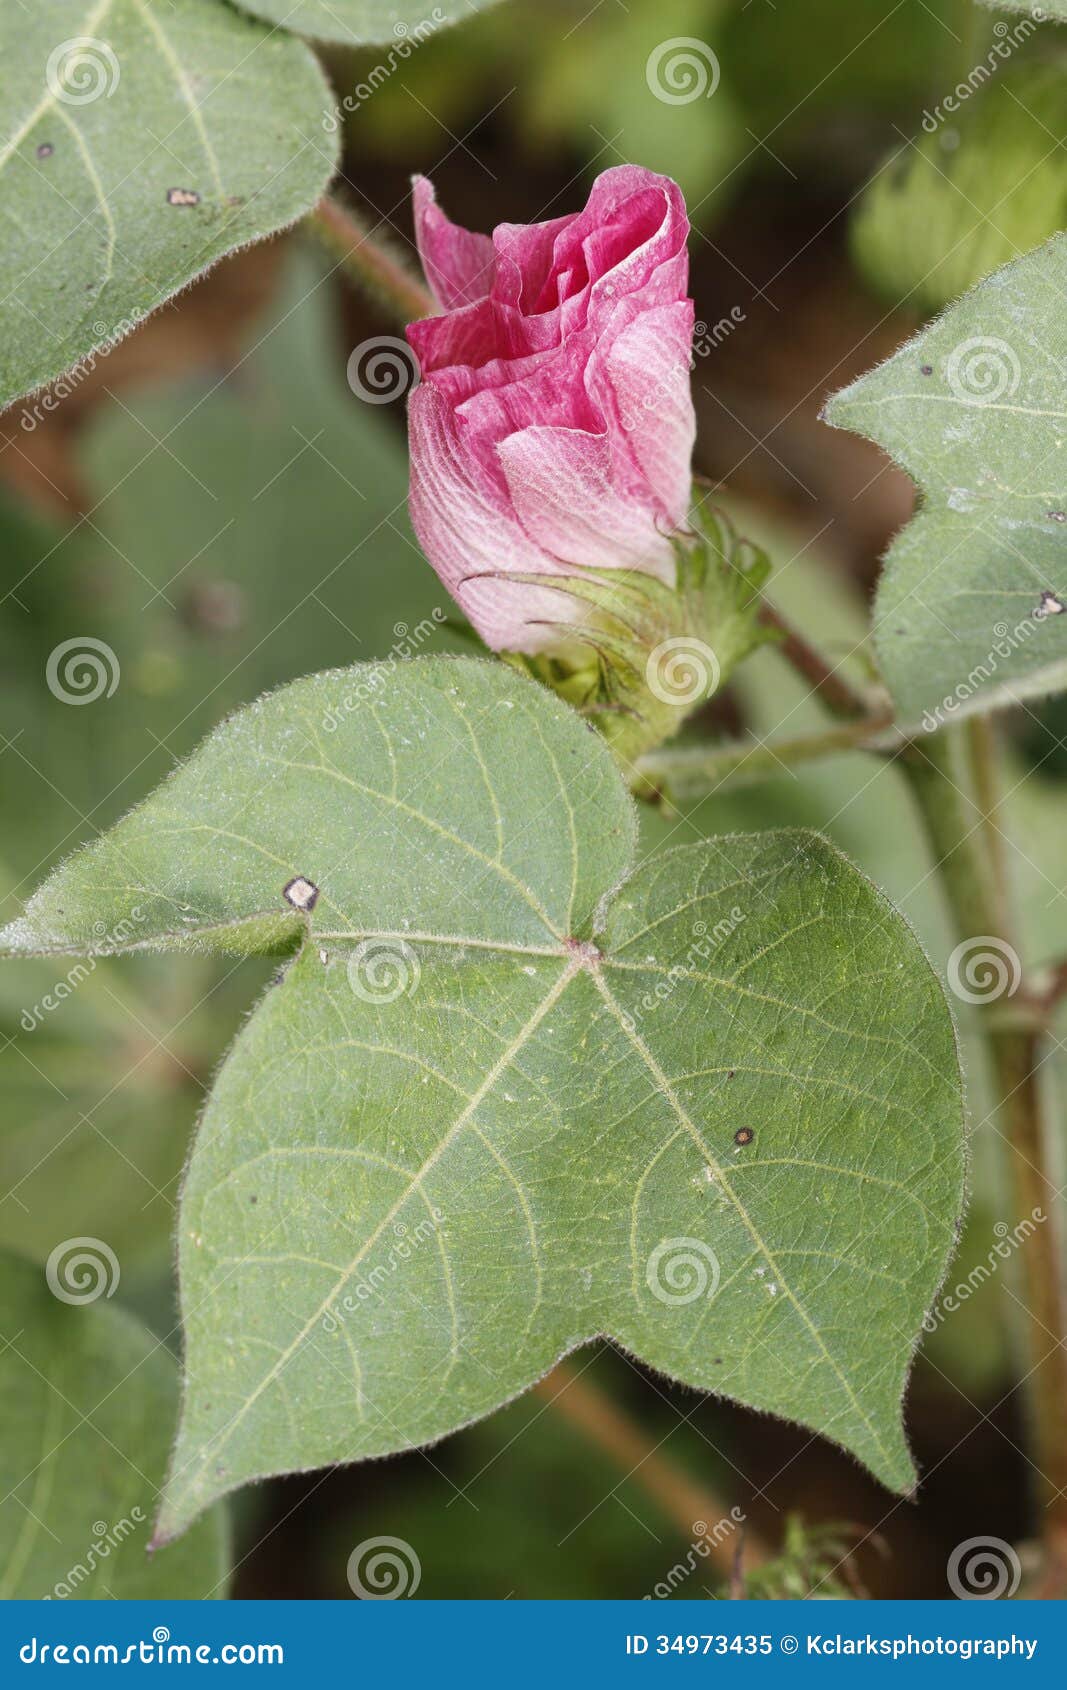 Pink Cotton Blossom - Gossypium Stock Image - Image of states, agriculture:  34973435